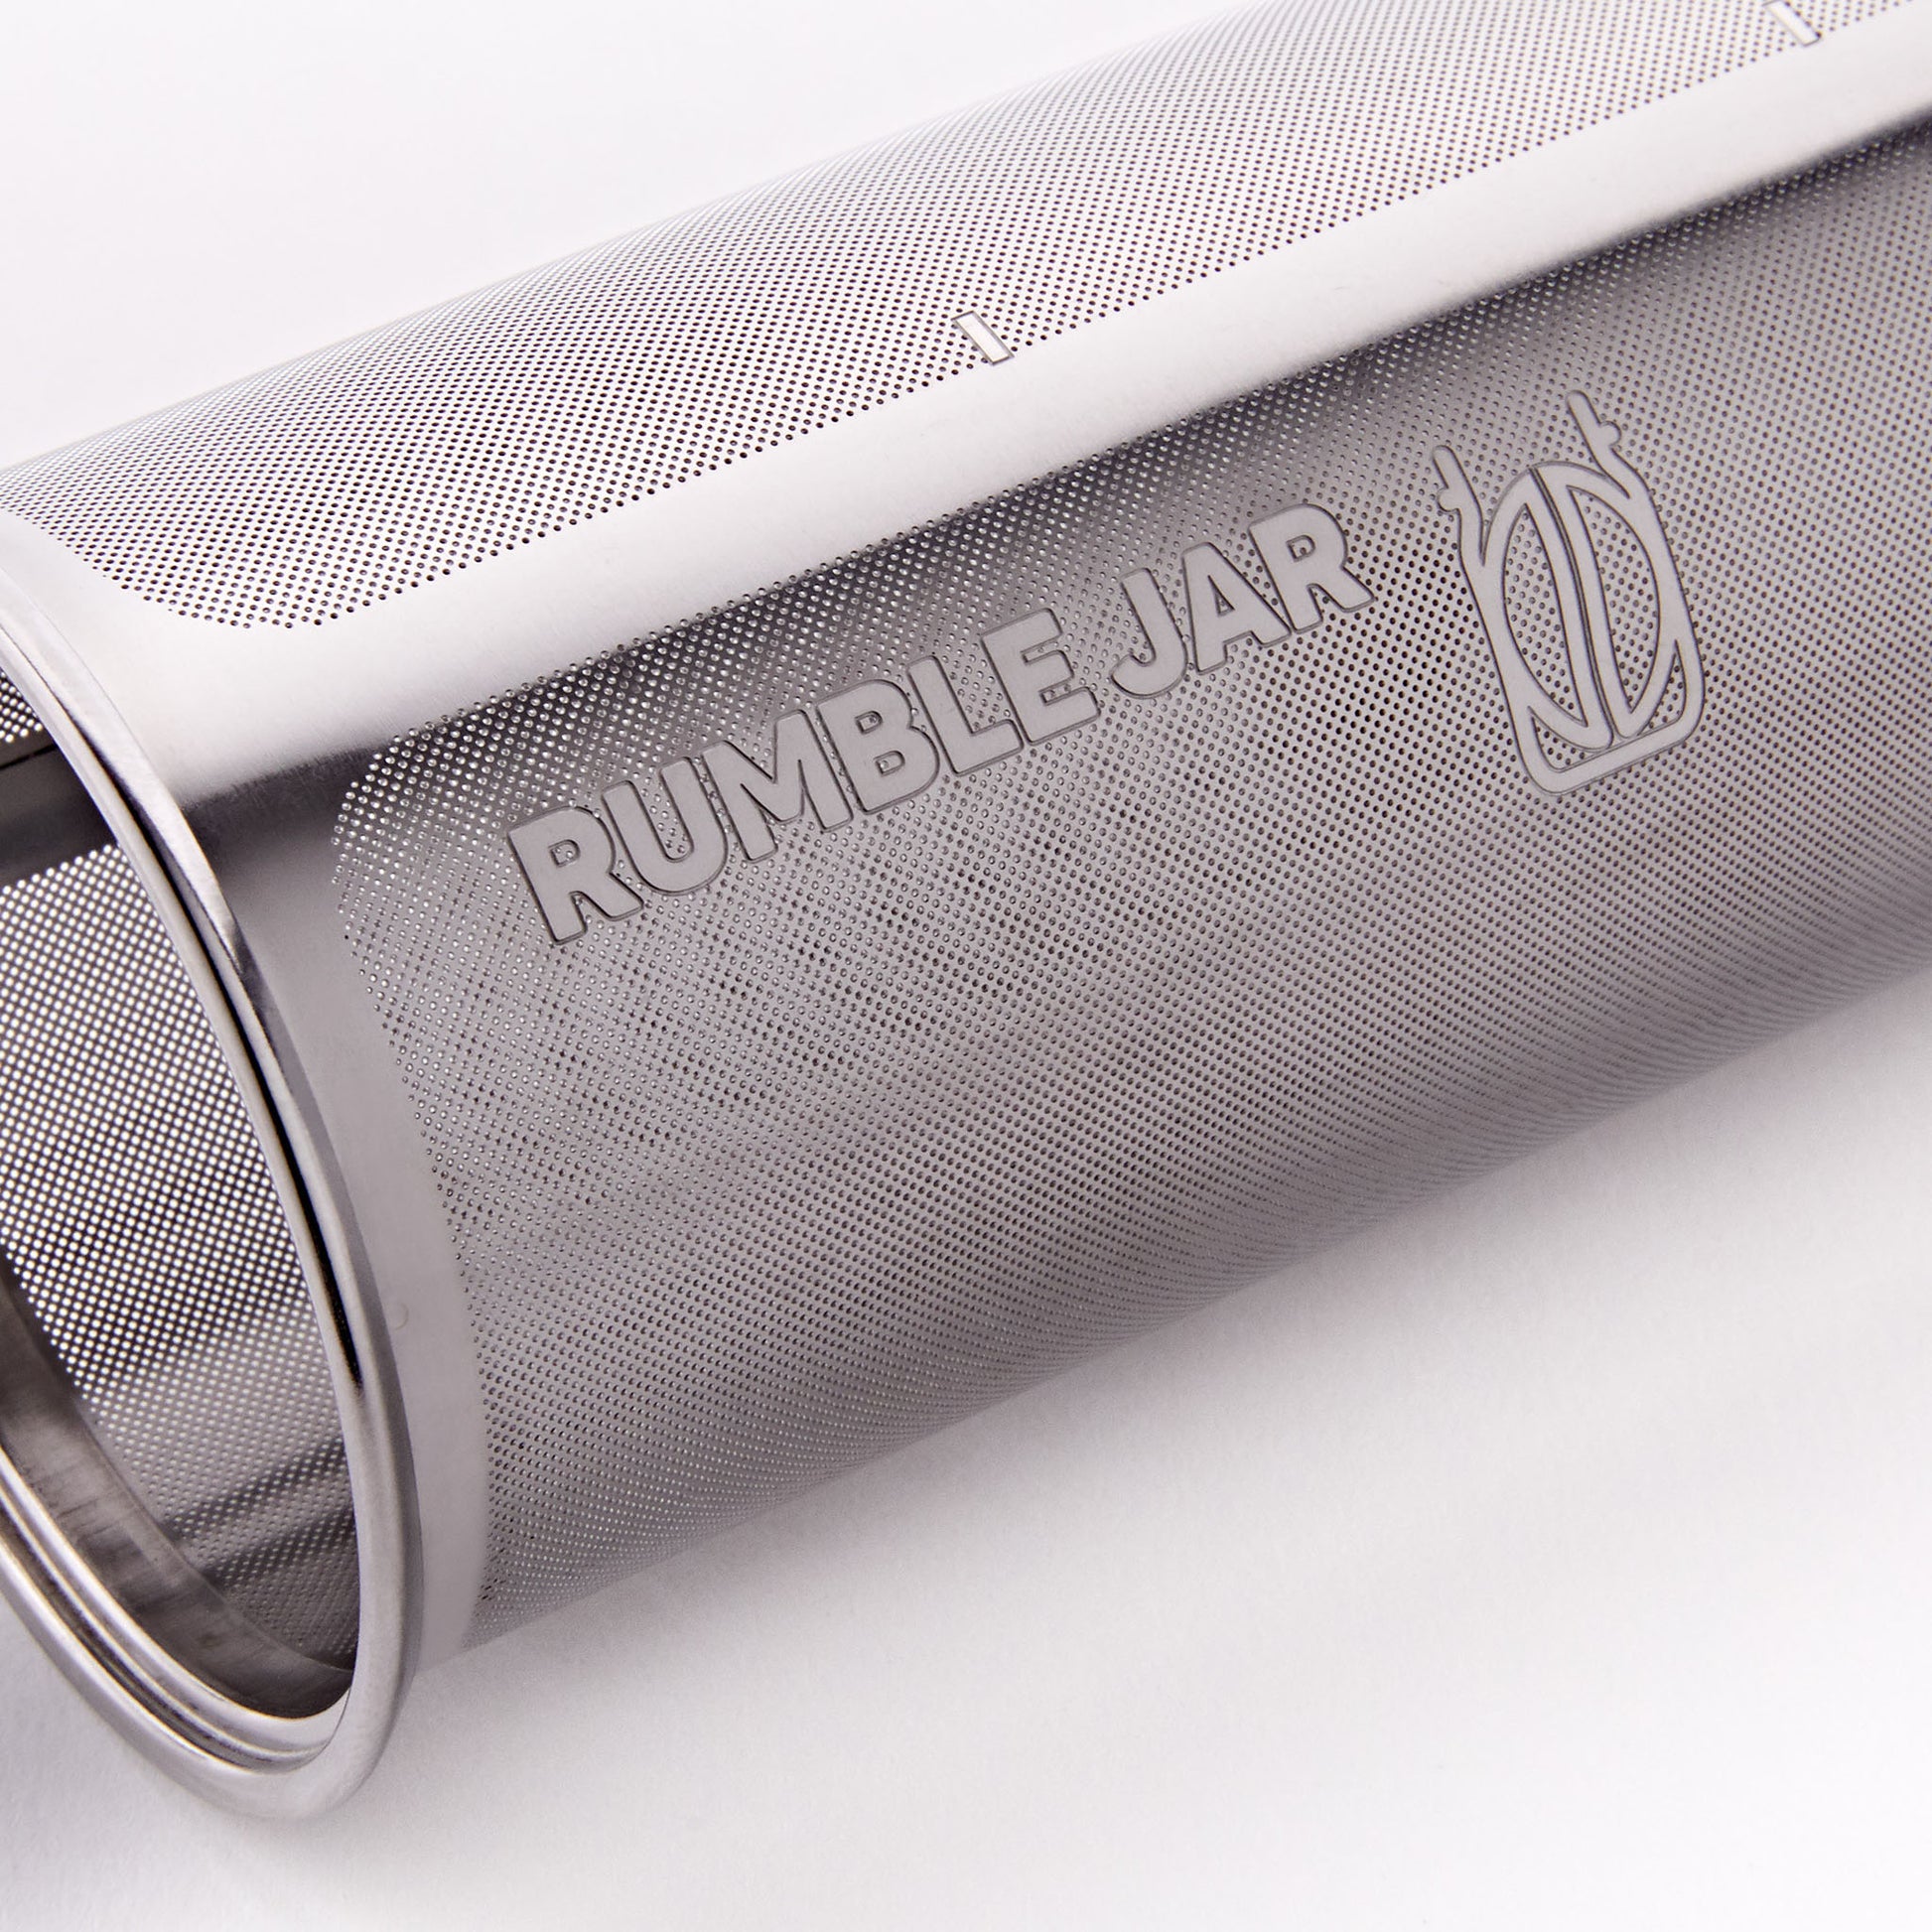 Rumble Jar features a sturdy etched filter design instead of a flimsy mesh filter